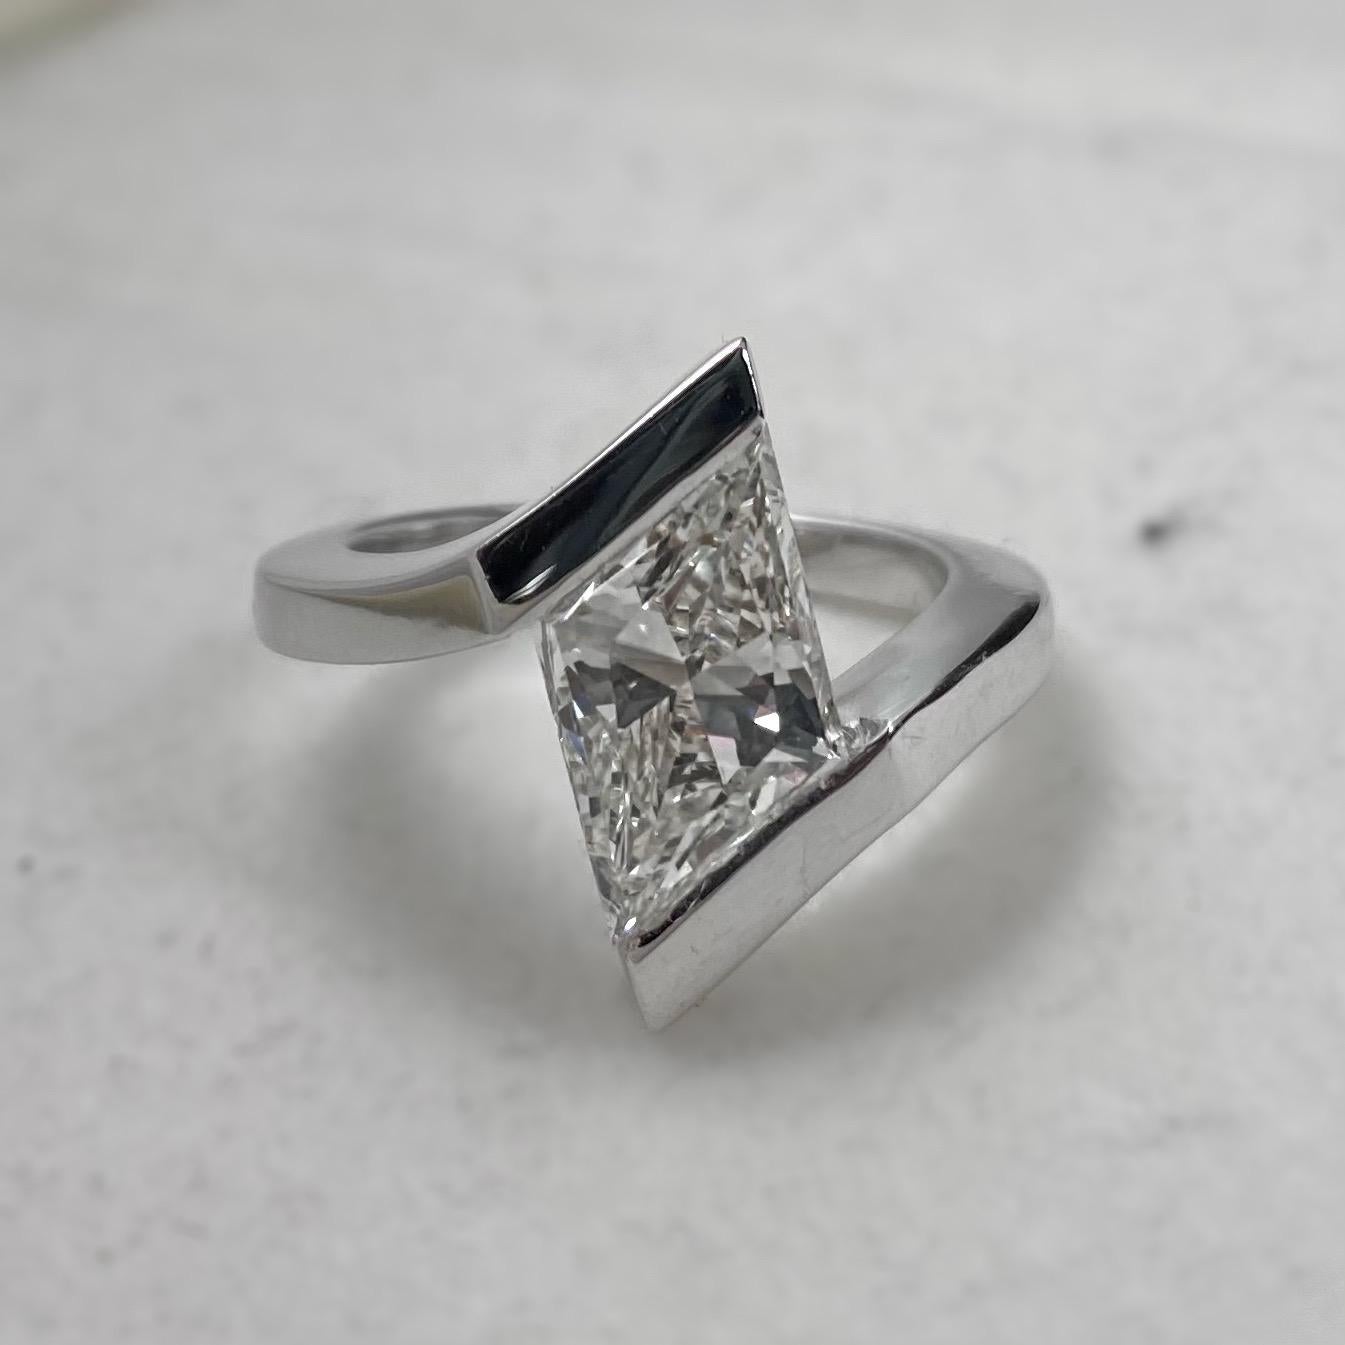 Contemporary 3.10ct Rhombus Modified Brilliant Cut Diamond Solitaire Engagement Ring in 19.2 Karat White Gold, Bespoke, circa 2010s. This handmade one-of-a-kind jewel features a beautiful diamond with a shape which is very rare to come across with –